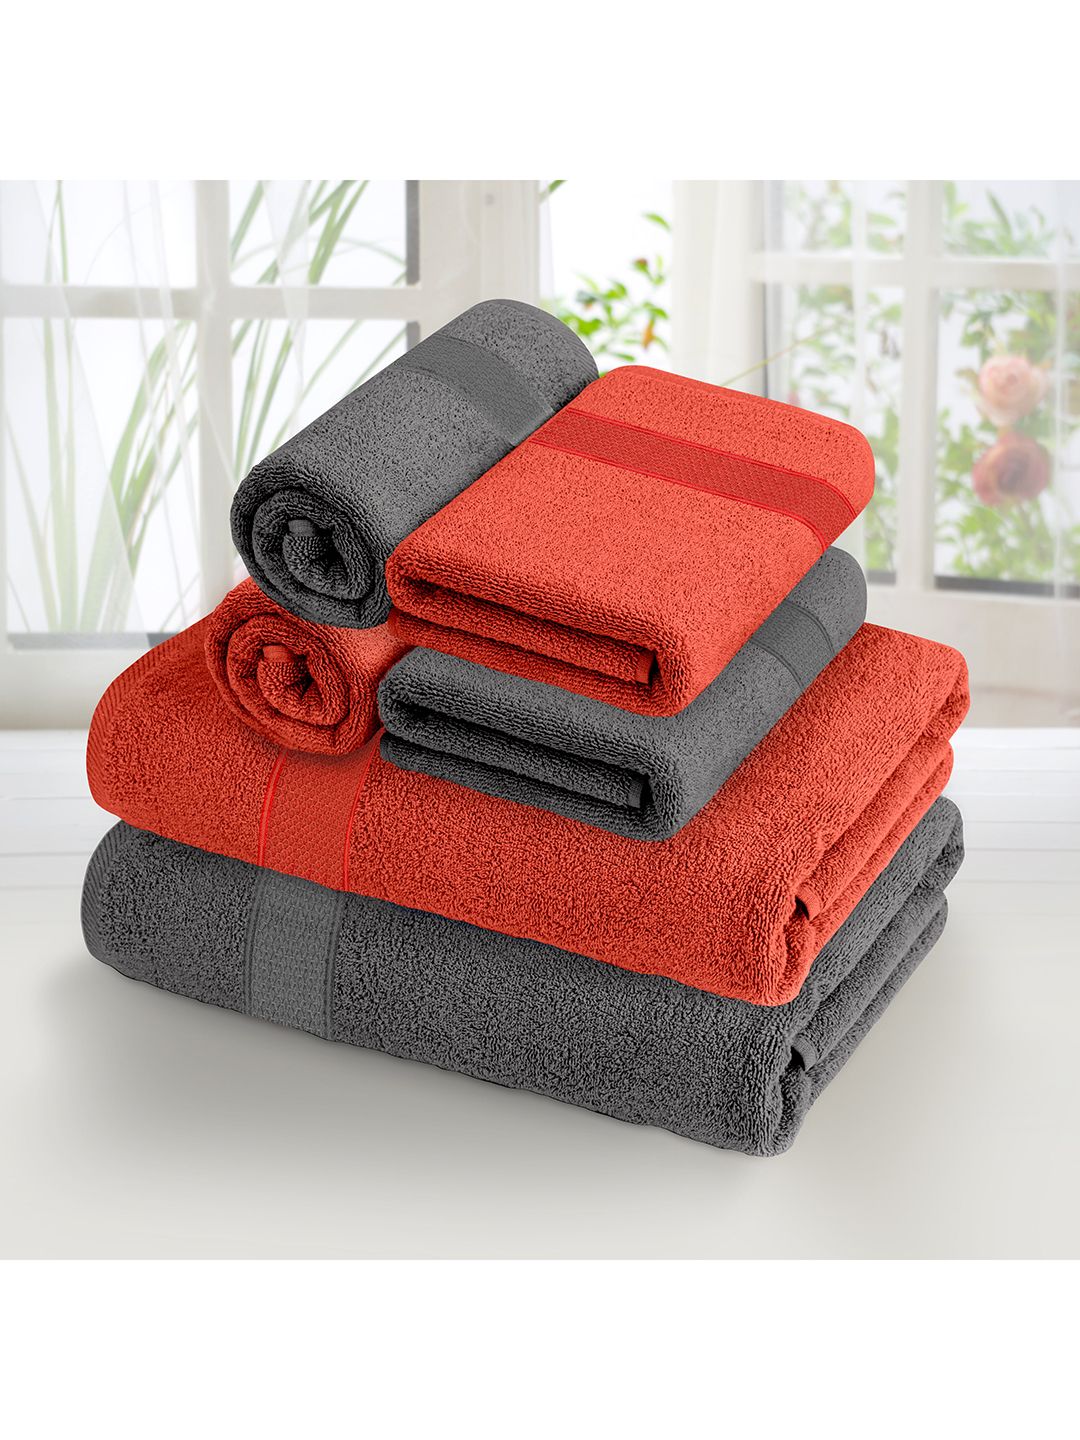 Athome by Nilkamal Set Of 6 Cotton 370 GSM Bath & Hand Towel Price in India